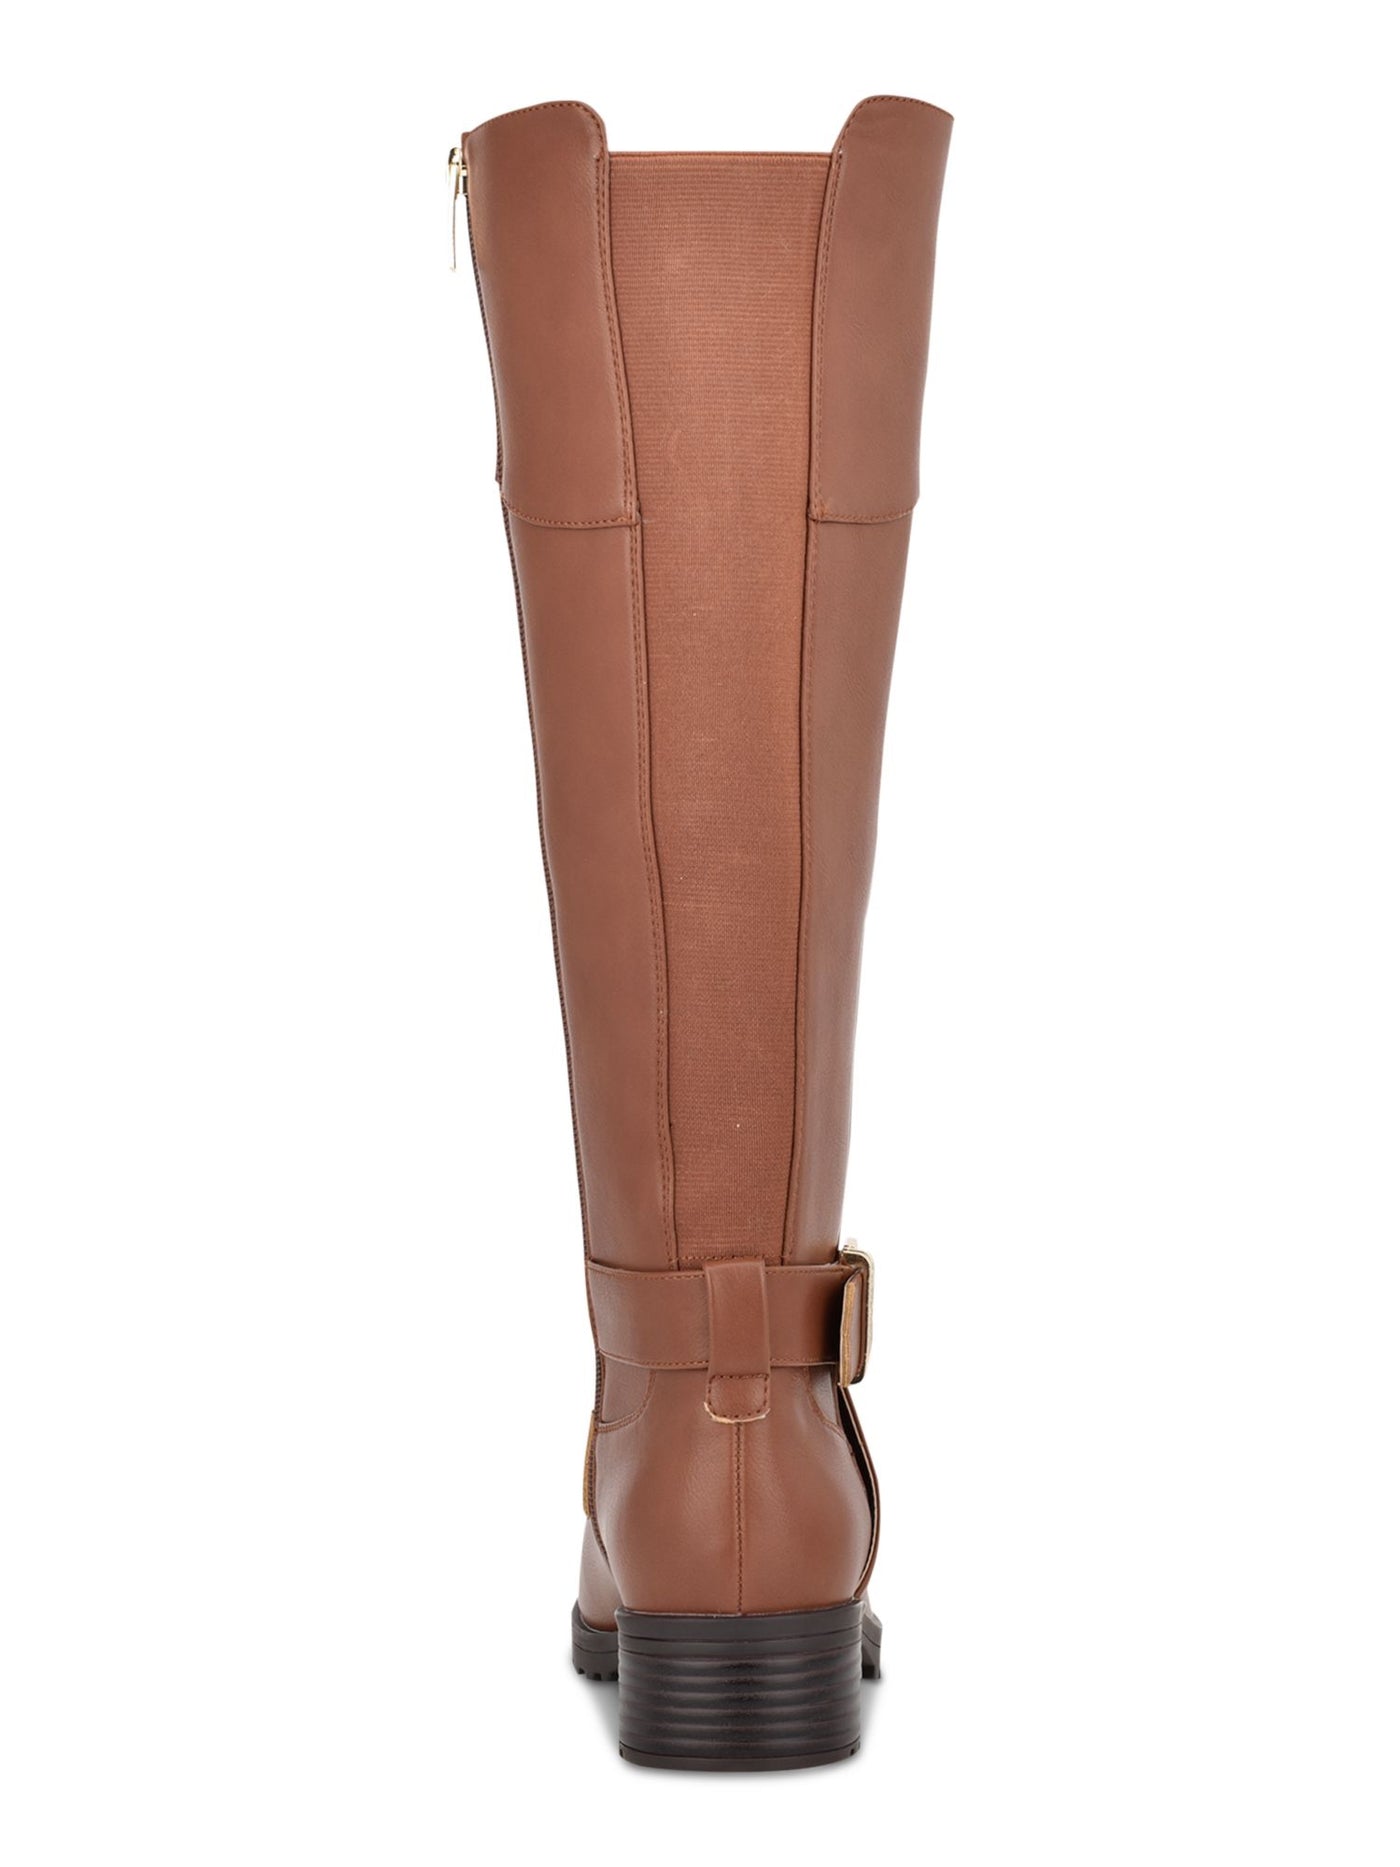 TOMMY HILFIGER Womens Brown Ankle Strap Buckle Accent Round Toe Block Heel Zip-Up Riding Boot 9